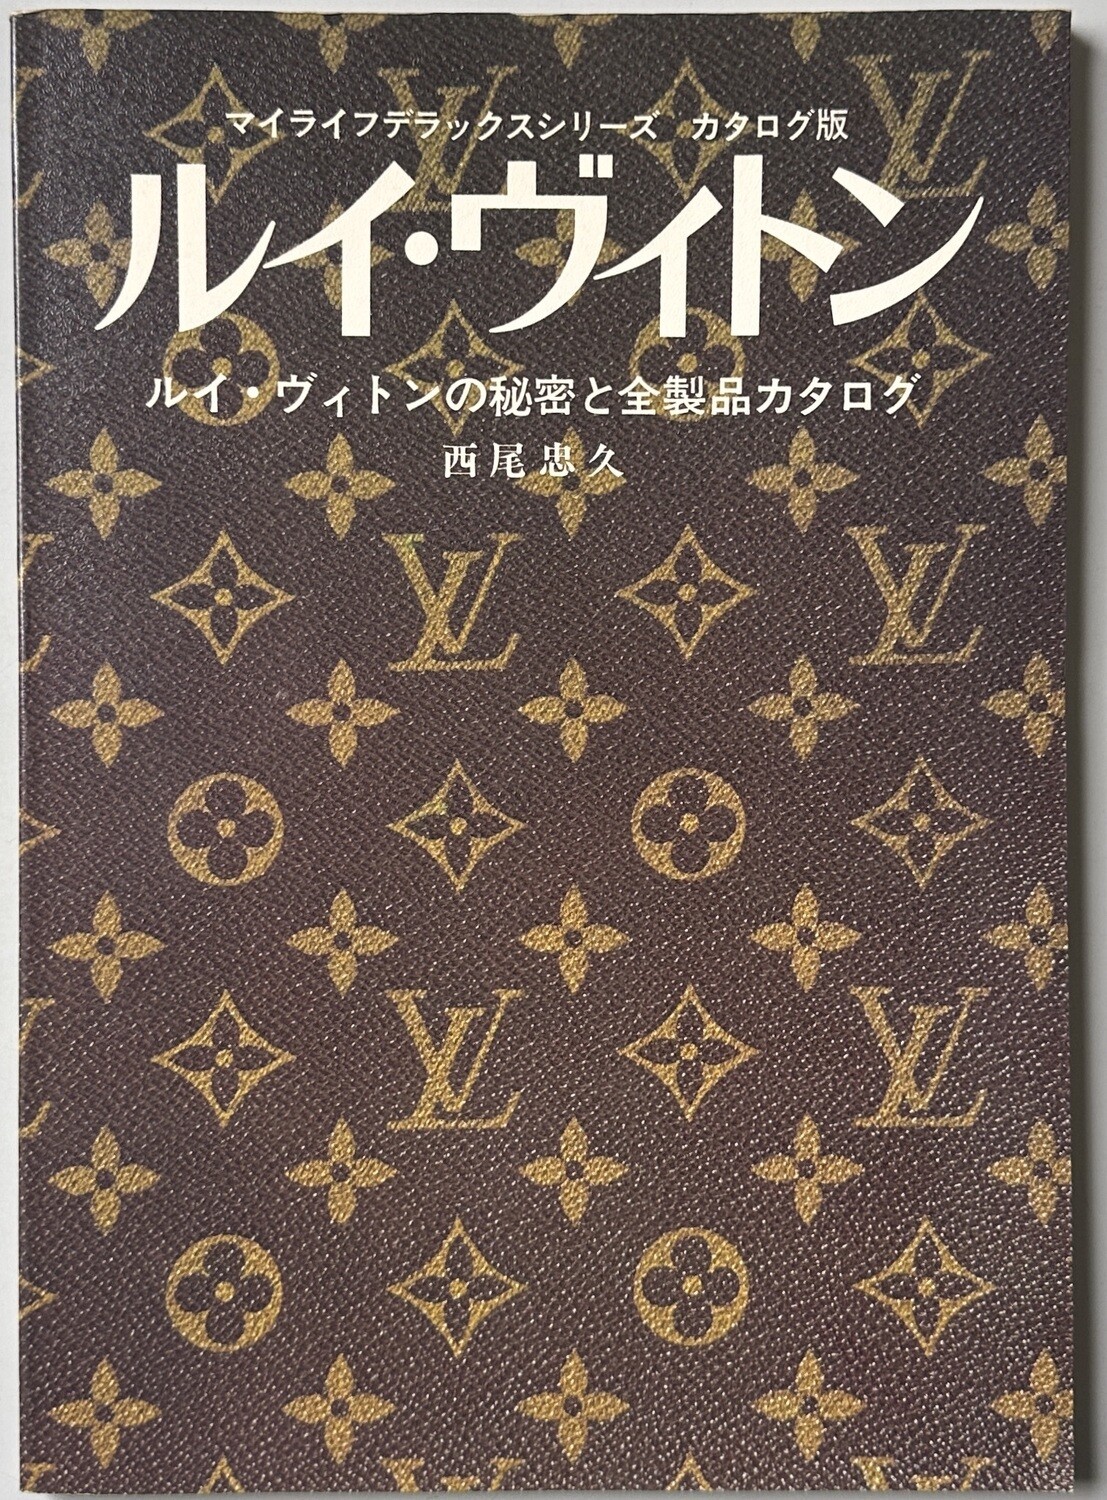 Louis Vuitton Vintage Reference Books